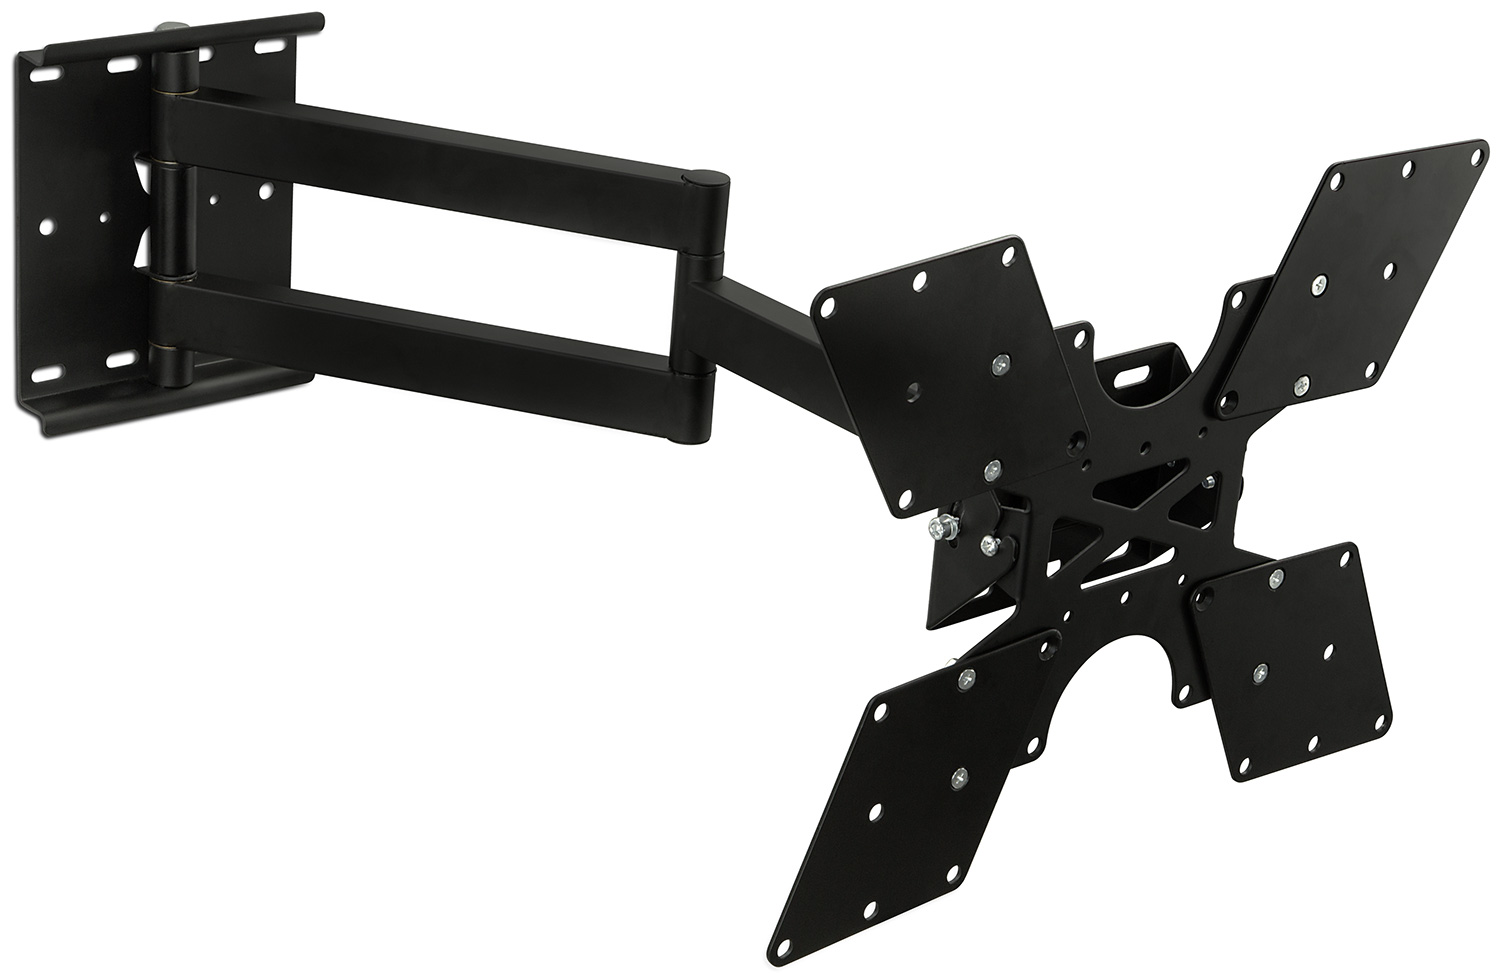 Mount-It! Full Motion TV Wall Mount, Long 25" Extension, Fits 32" to 52" TV's, Capacity 100 lbs., Heavy Duty, Single Stud Mount - image 1 of 11